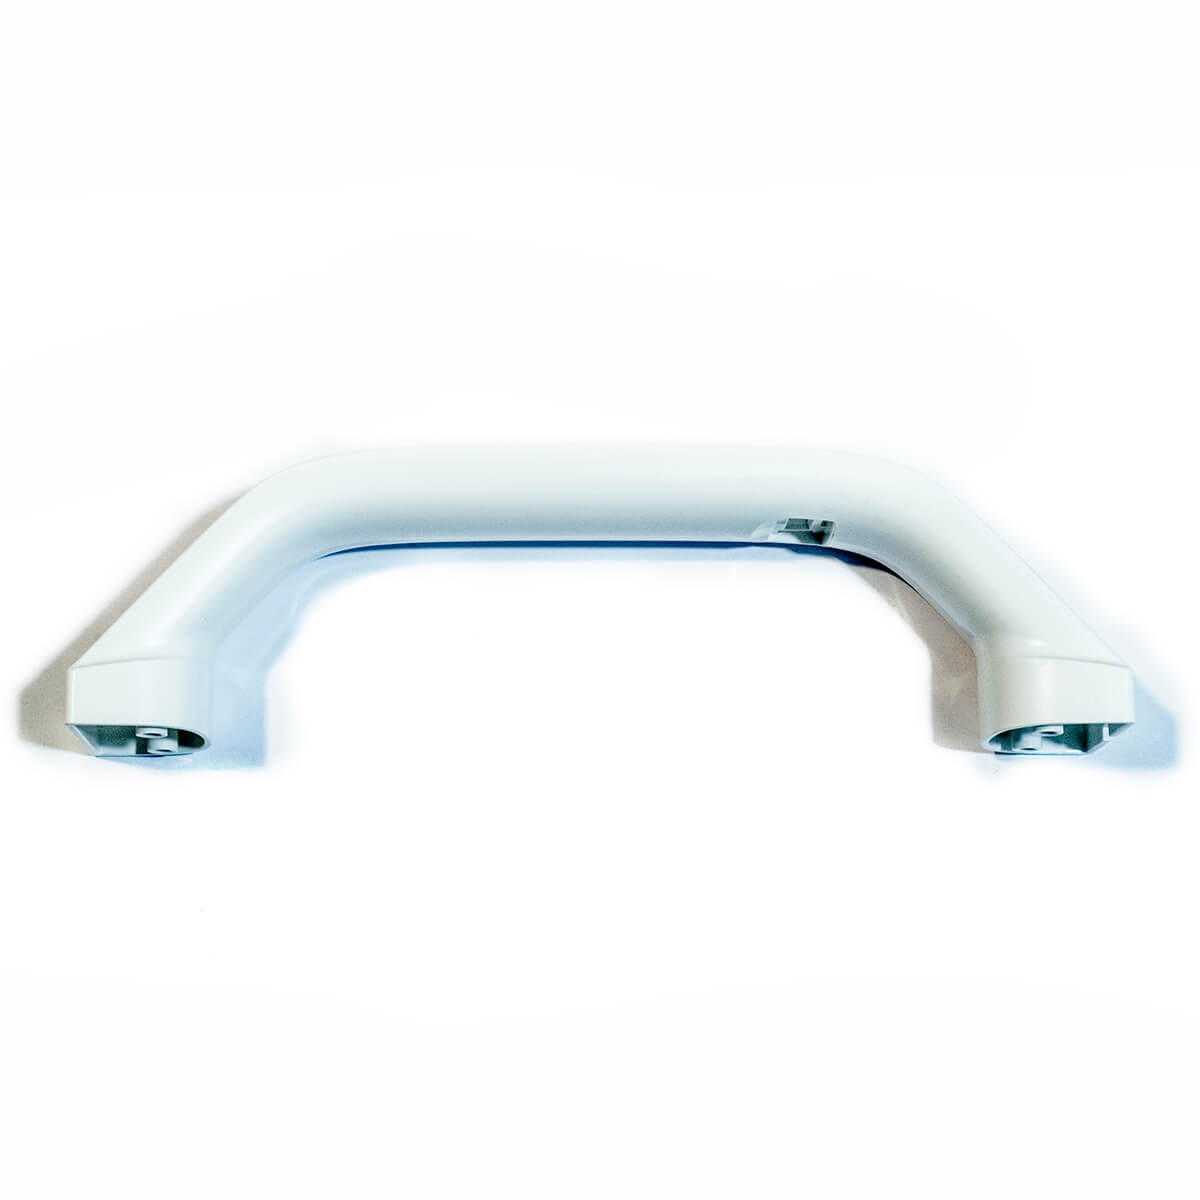 Handle cover for W850 (10001039)